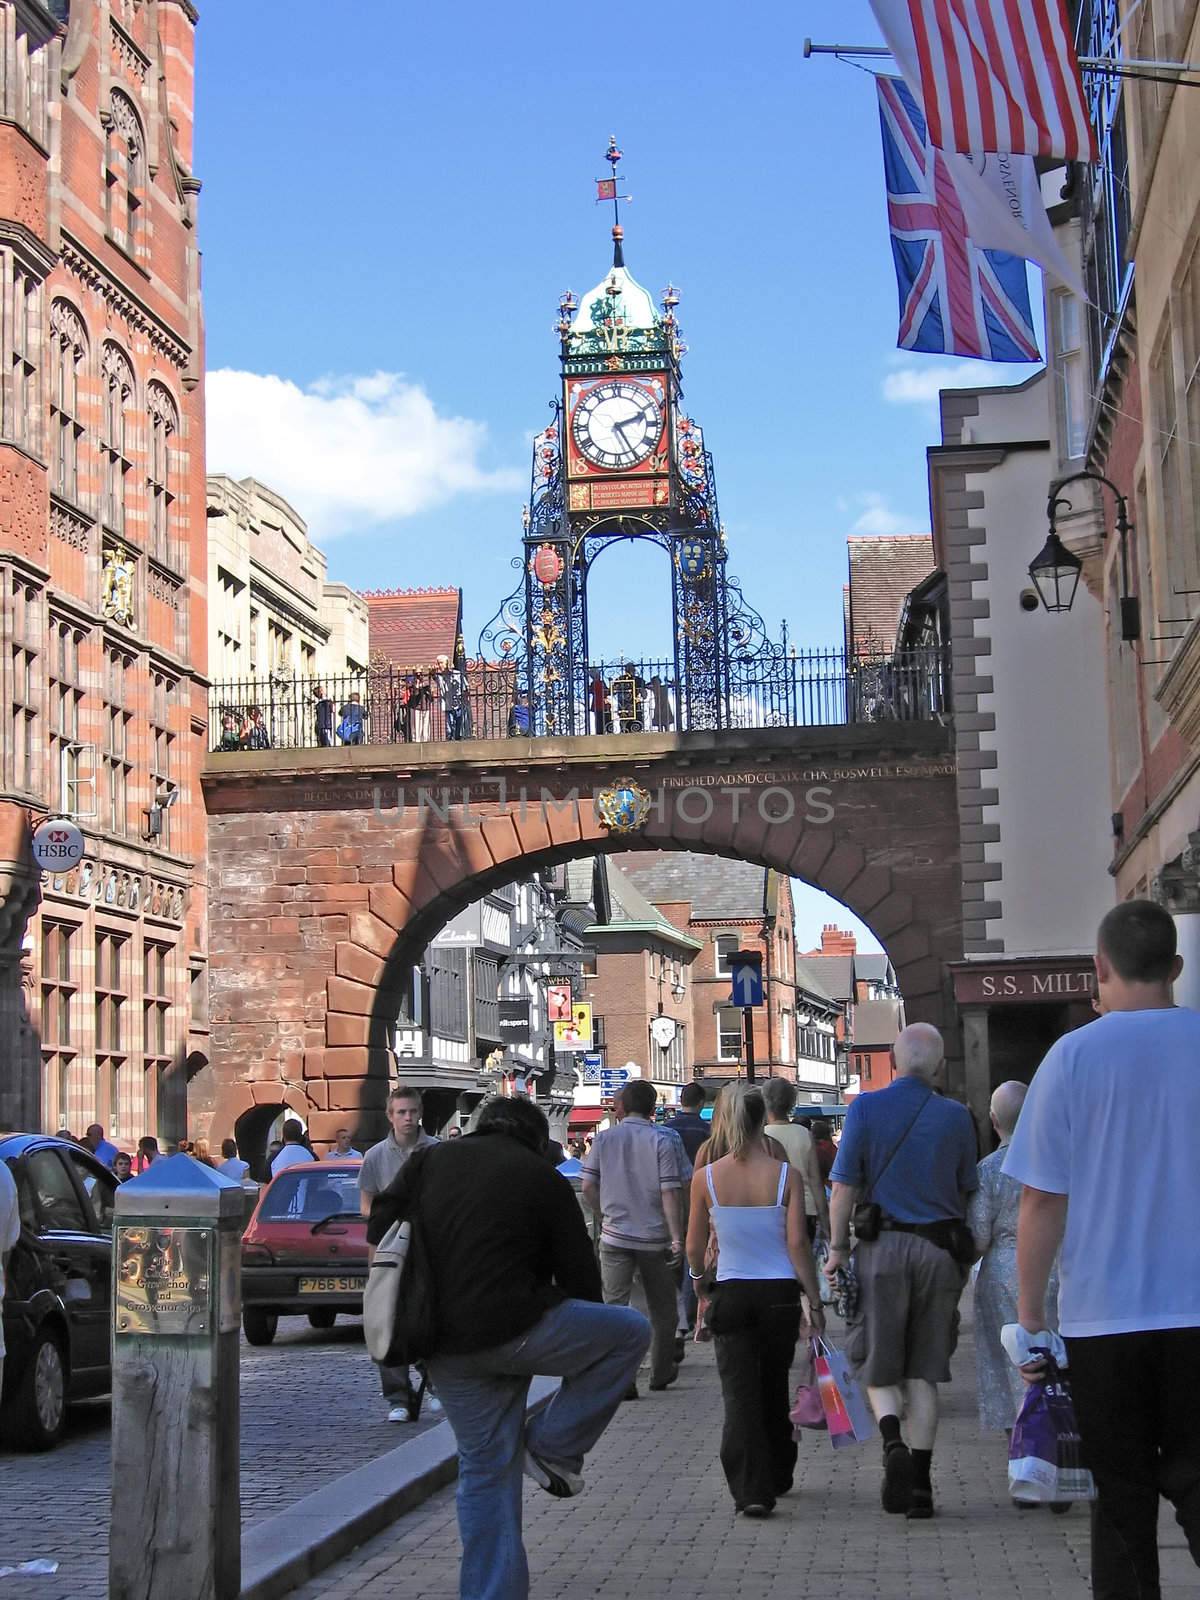 Shoppers and Tourists by the Clock in Chester England by green308